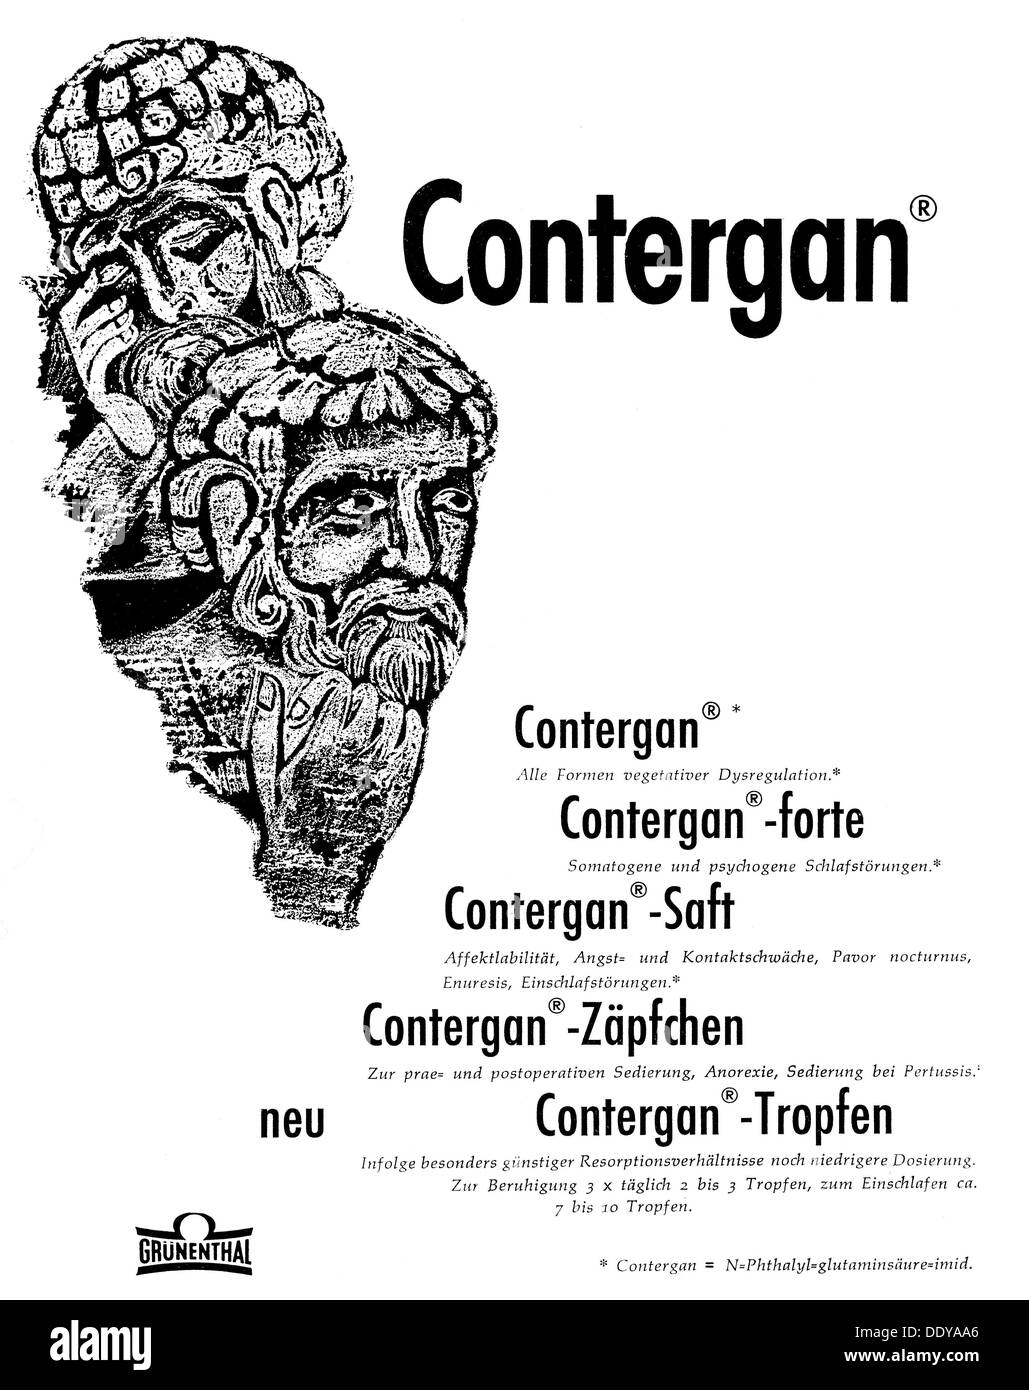 advertising, medicine, advertisement for 'Contergan', Grünenthal GmbH, late 1950s, Additional-Rights-Clearences-Not Available Stock Photo